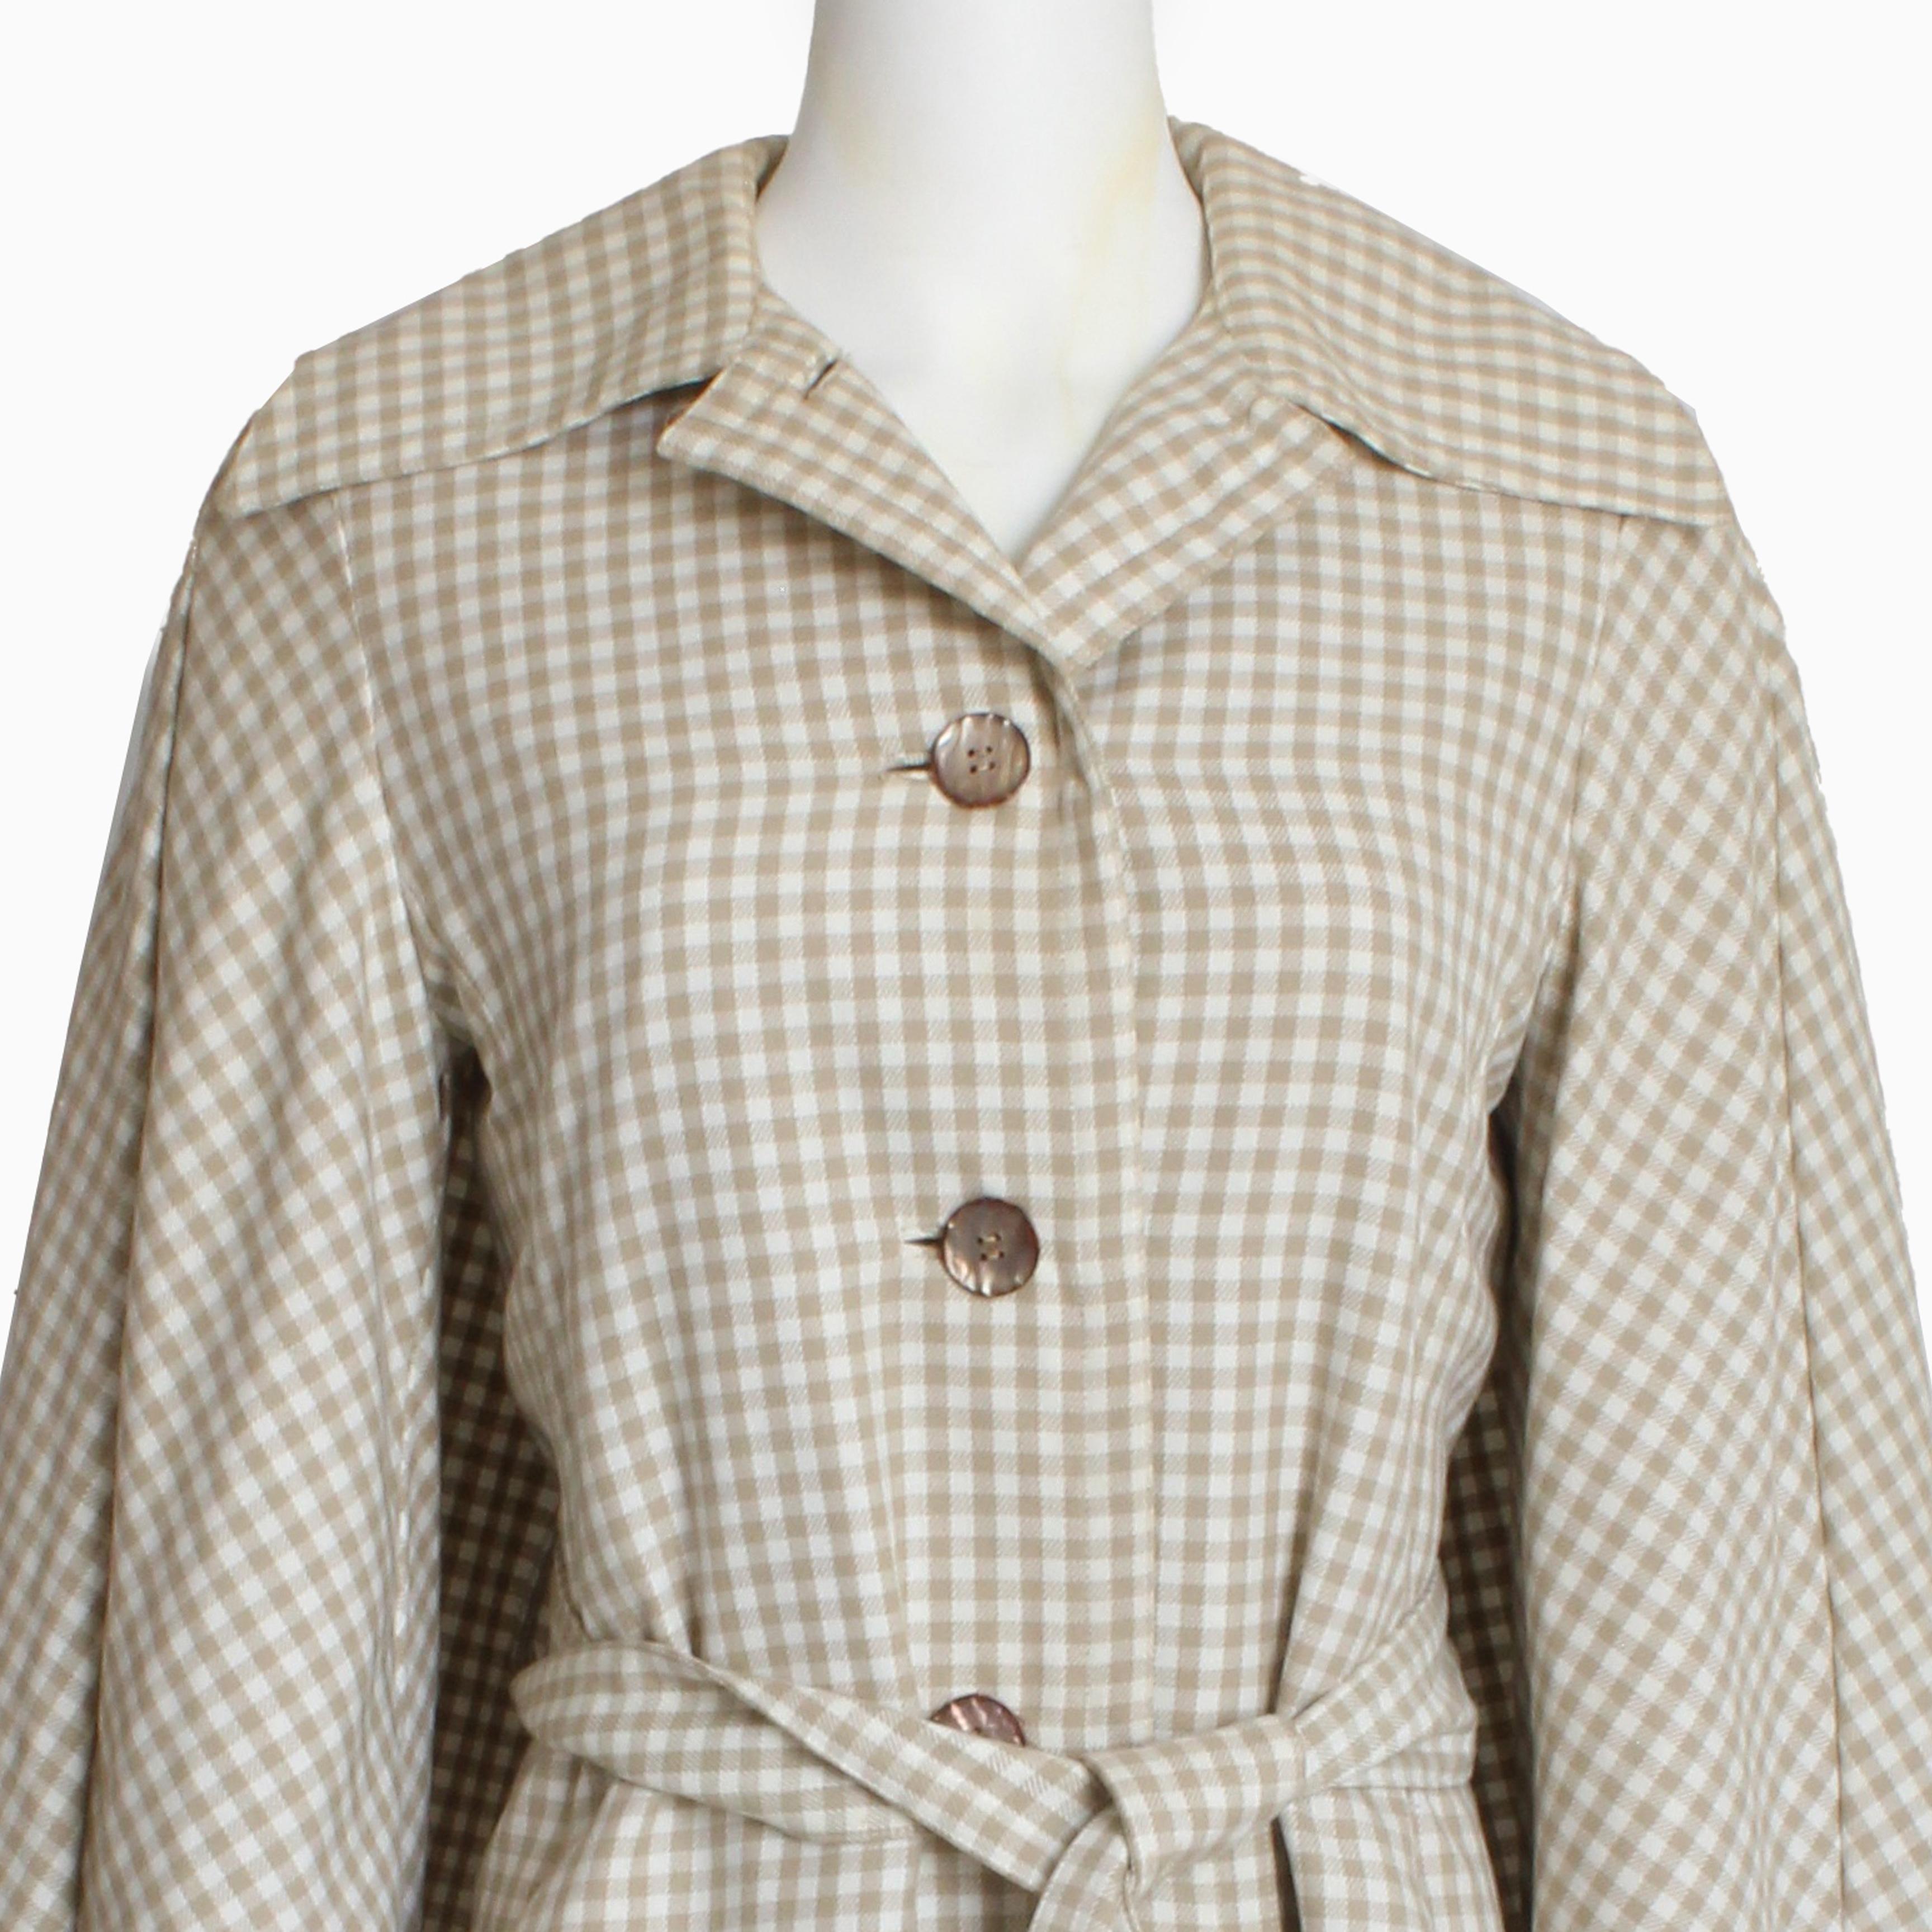 Women's Donald Brooks Jacket with Caplet Trench Style Tan White Check Pattern Vintage 